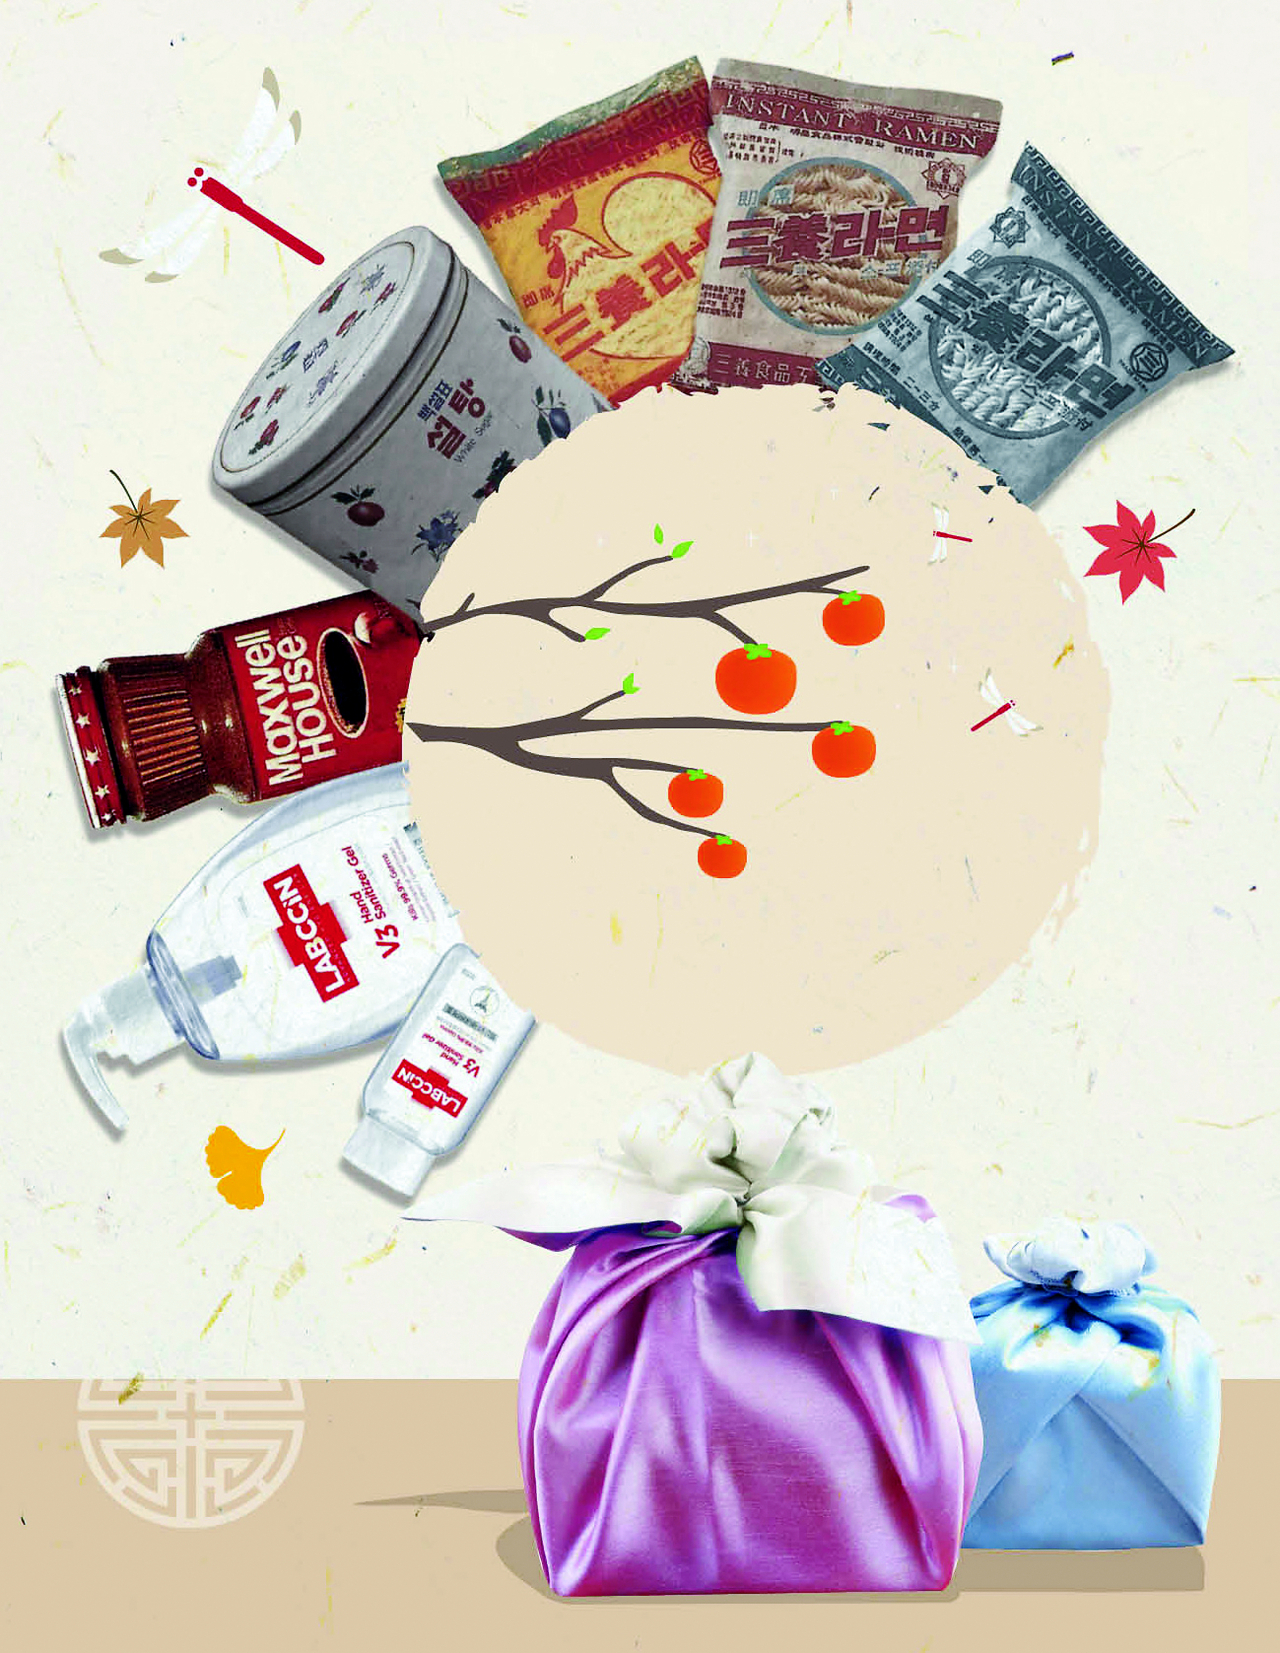 Chuseok gift items, both affordable and expensive, were necessities that people cherished the most. They were Korean instant noodles and sugar in the 1960s and instant coffee in the 1970s. This year they are hand sanitizers and fruit packages, amid the ongoing COVID-19 pandemic and rapid inflation. Illustration by Park Ji-young